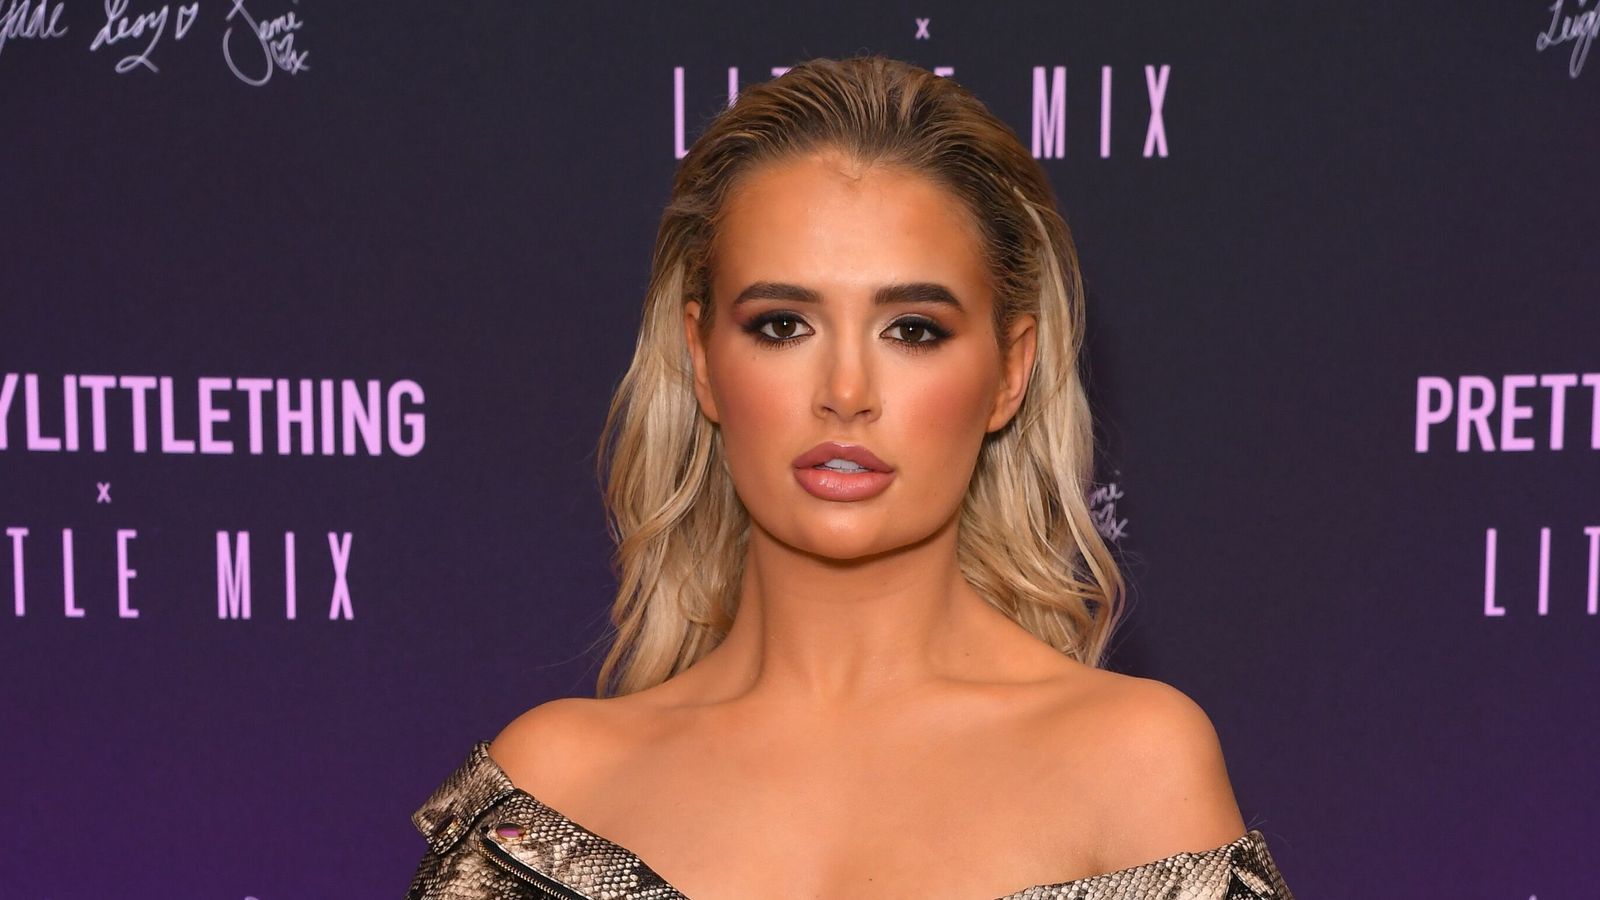 Love Island’s Molly-Mae Hague blasted after ‘Thatcherite’ feedback on poverty and laborious work